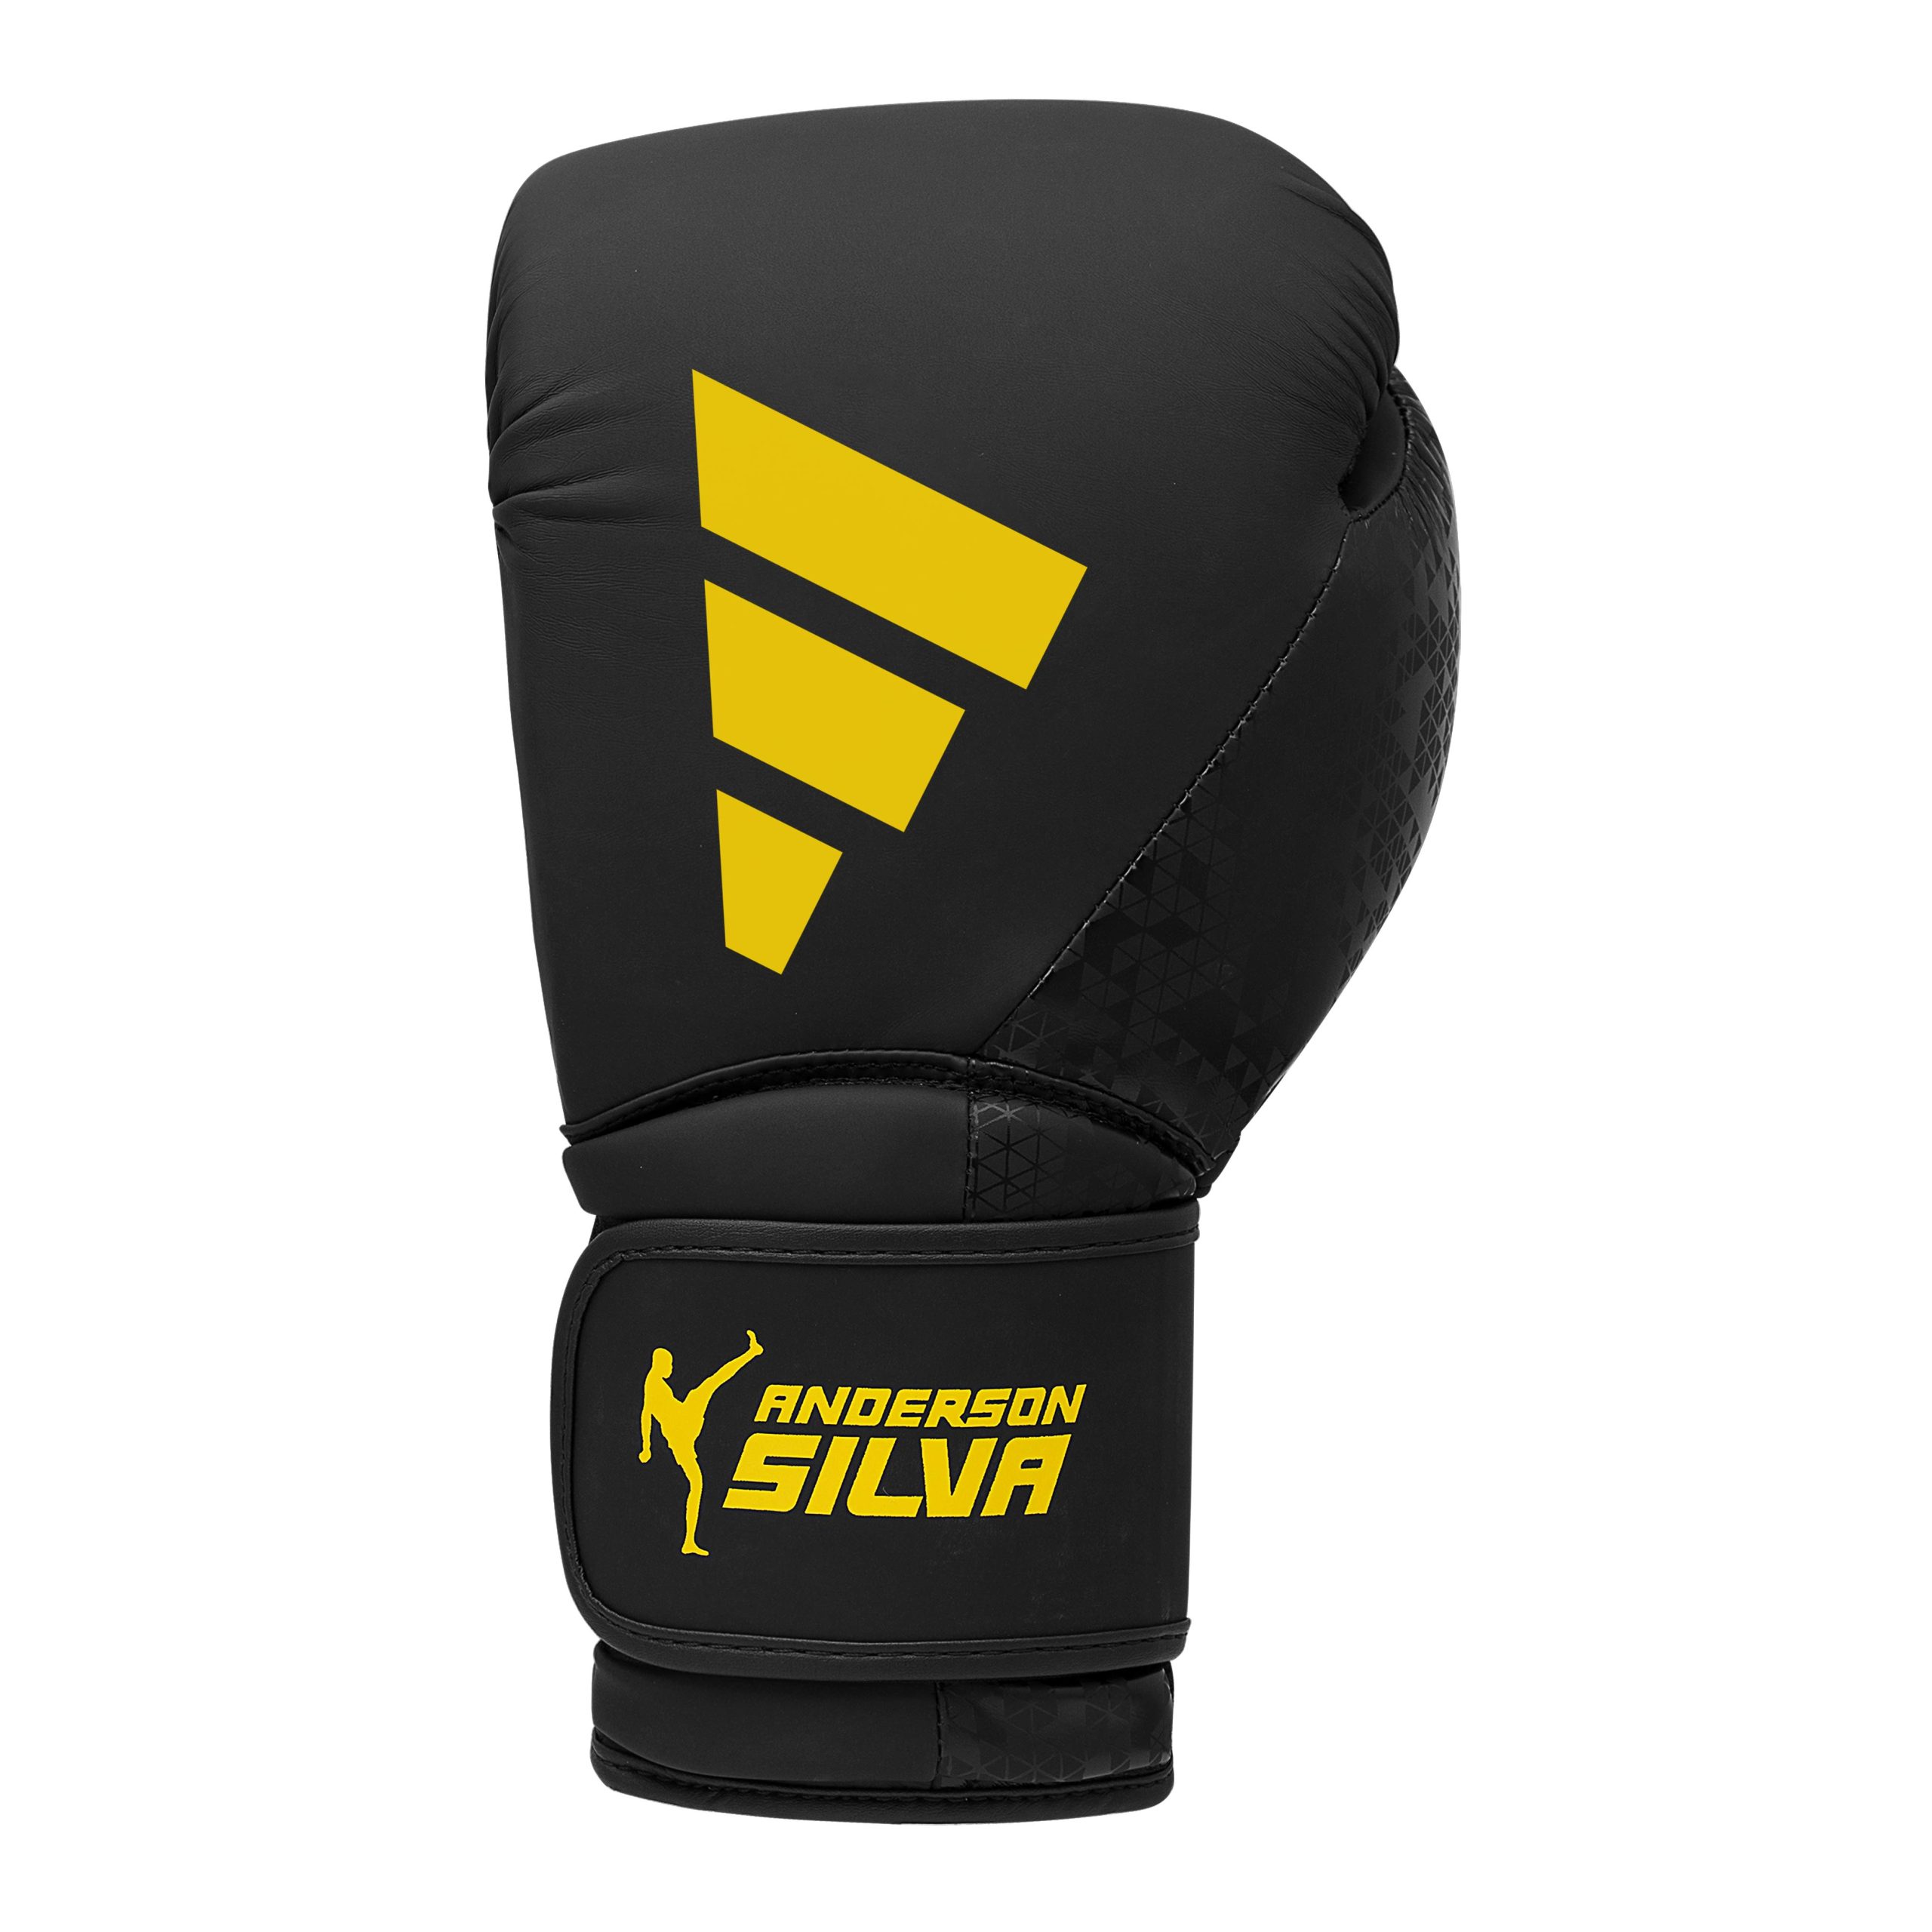 Adidas x Anderson Silva Everyday Use Boxing Gloves